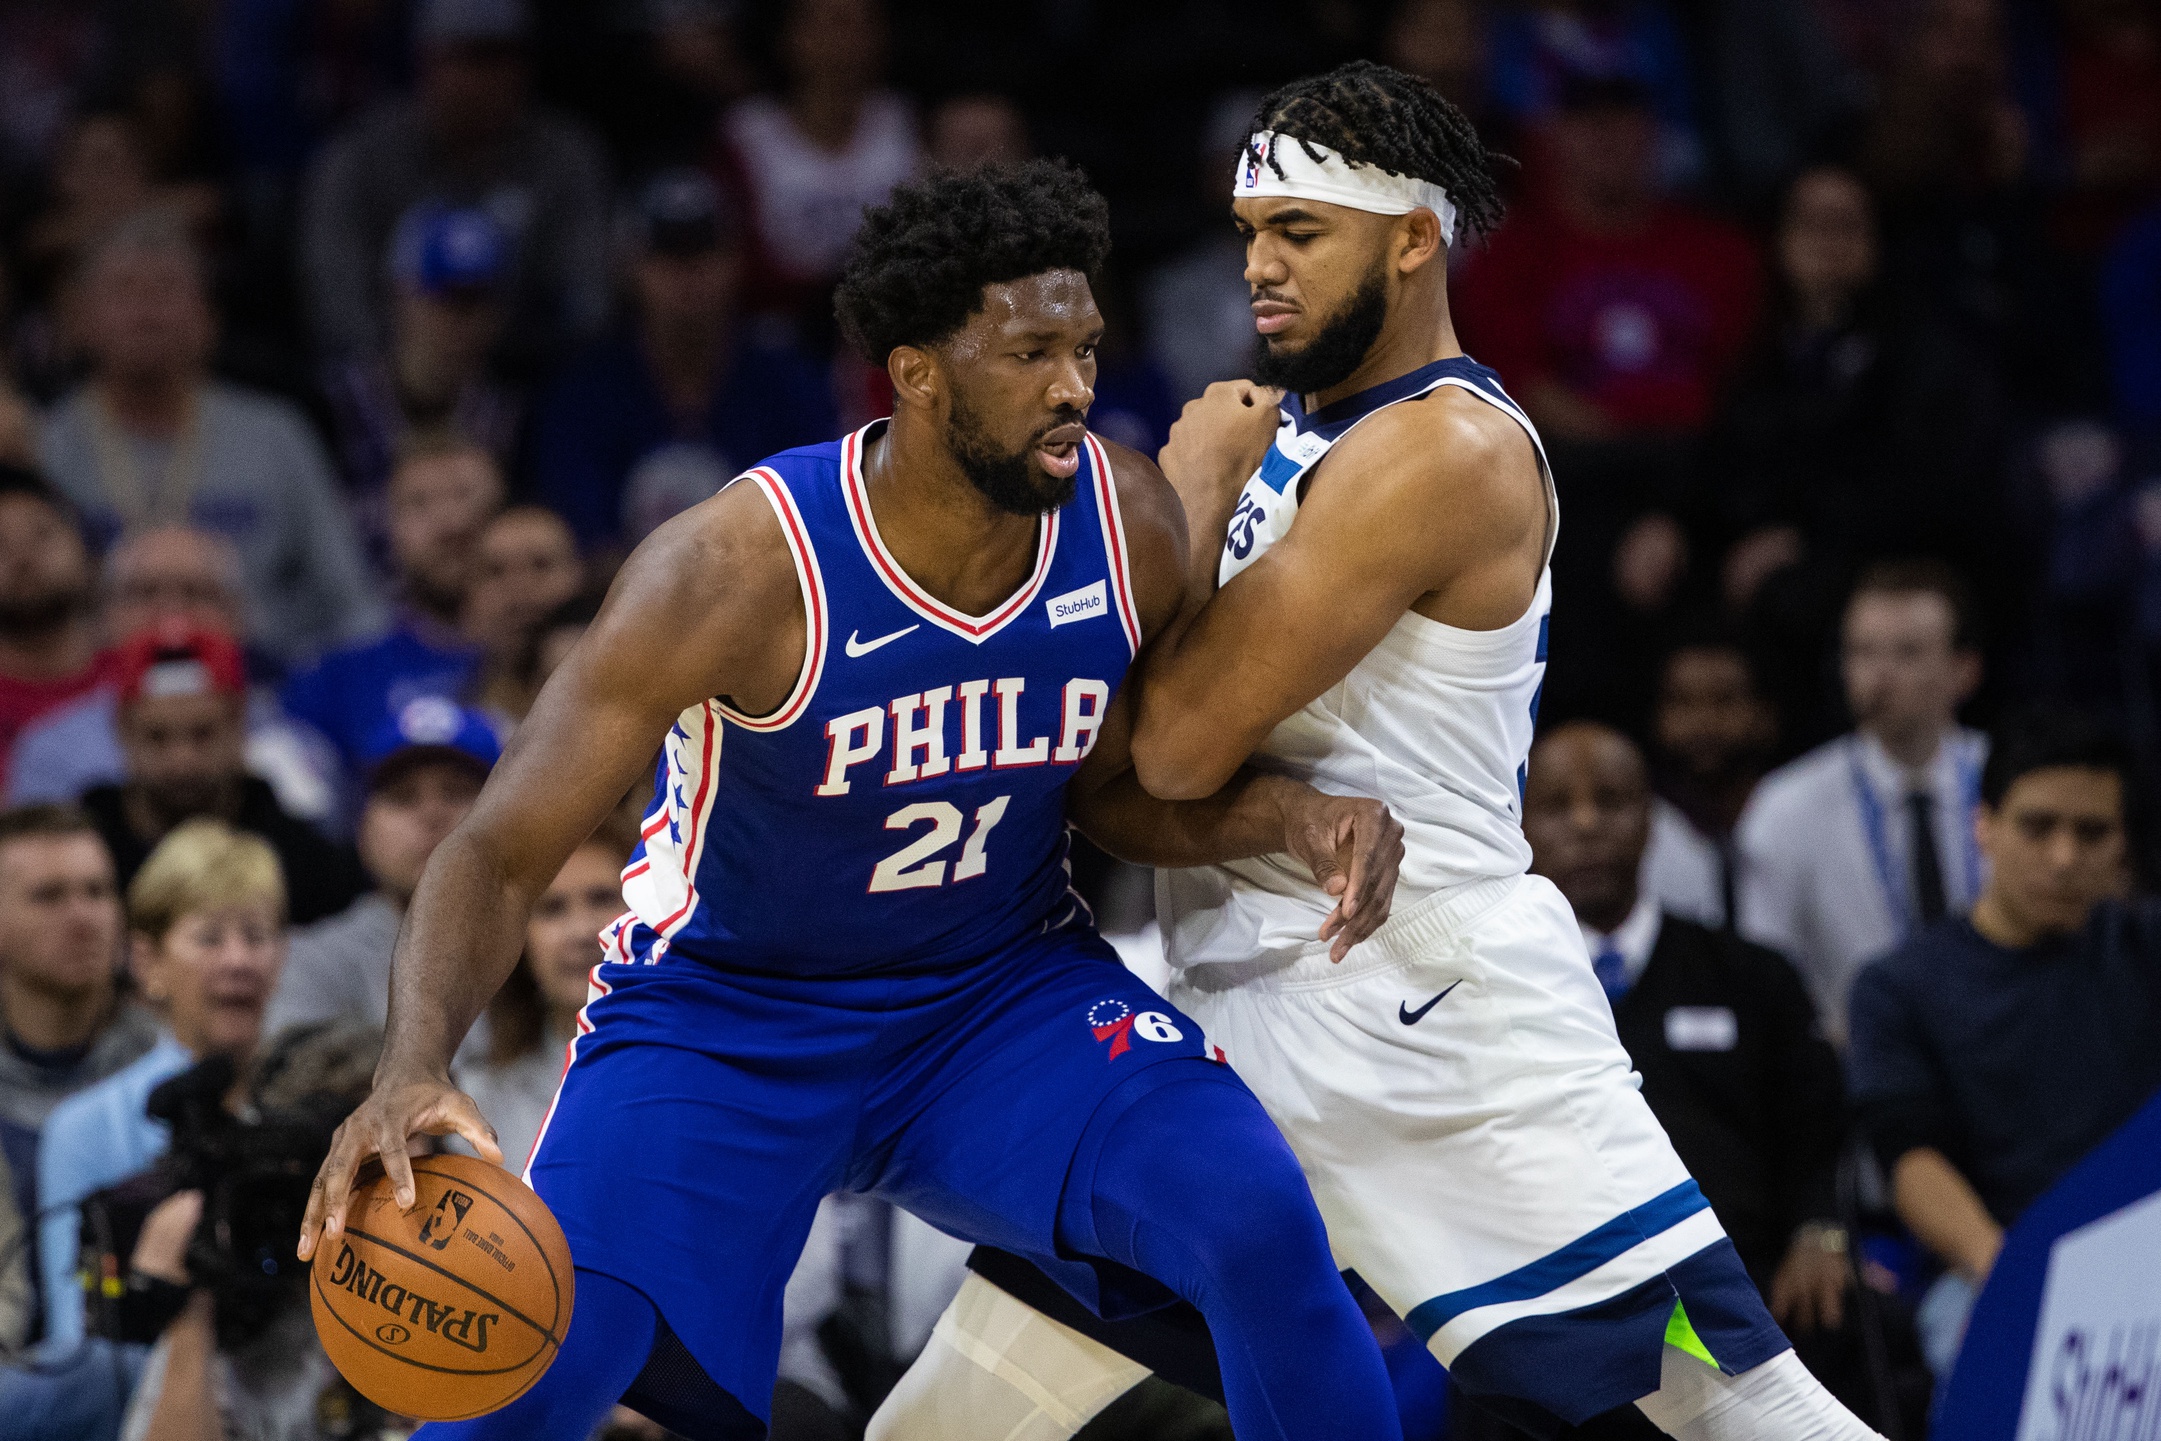 Embiid, Towns rematch set for March 24th, 2020 in Minneapolis